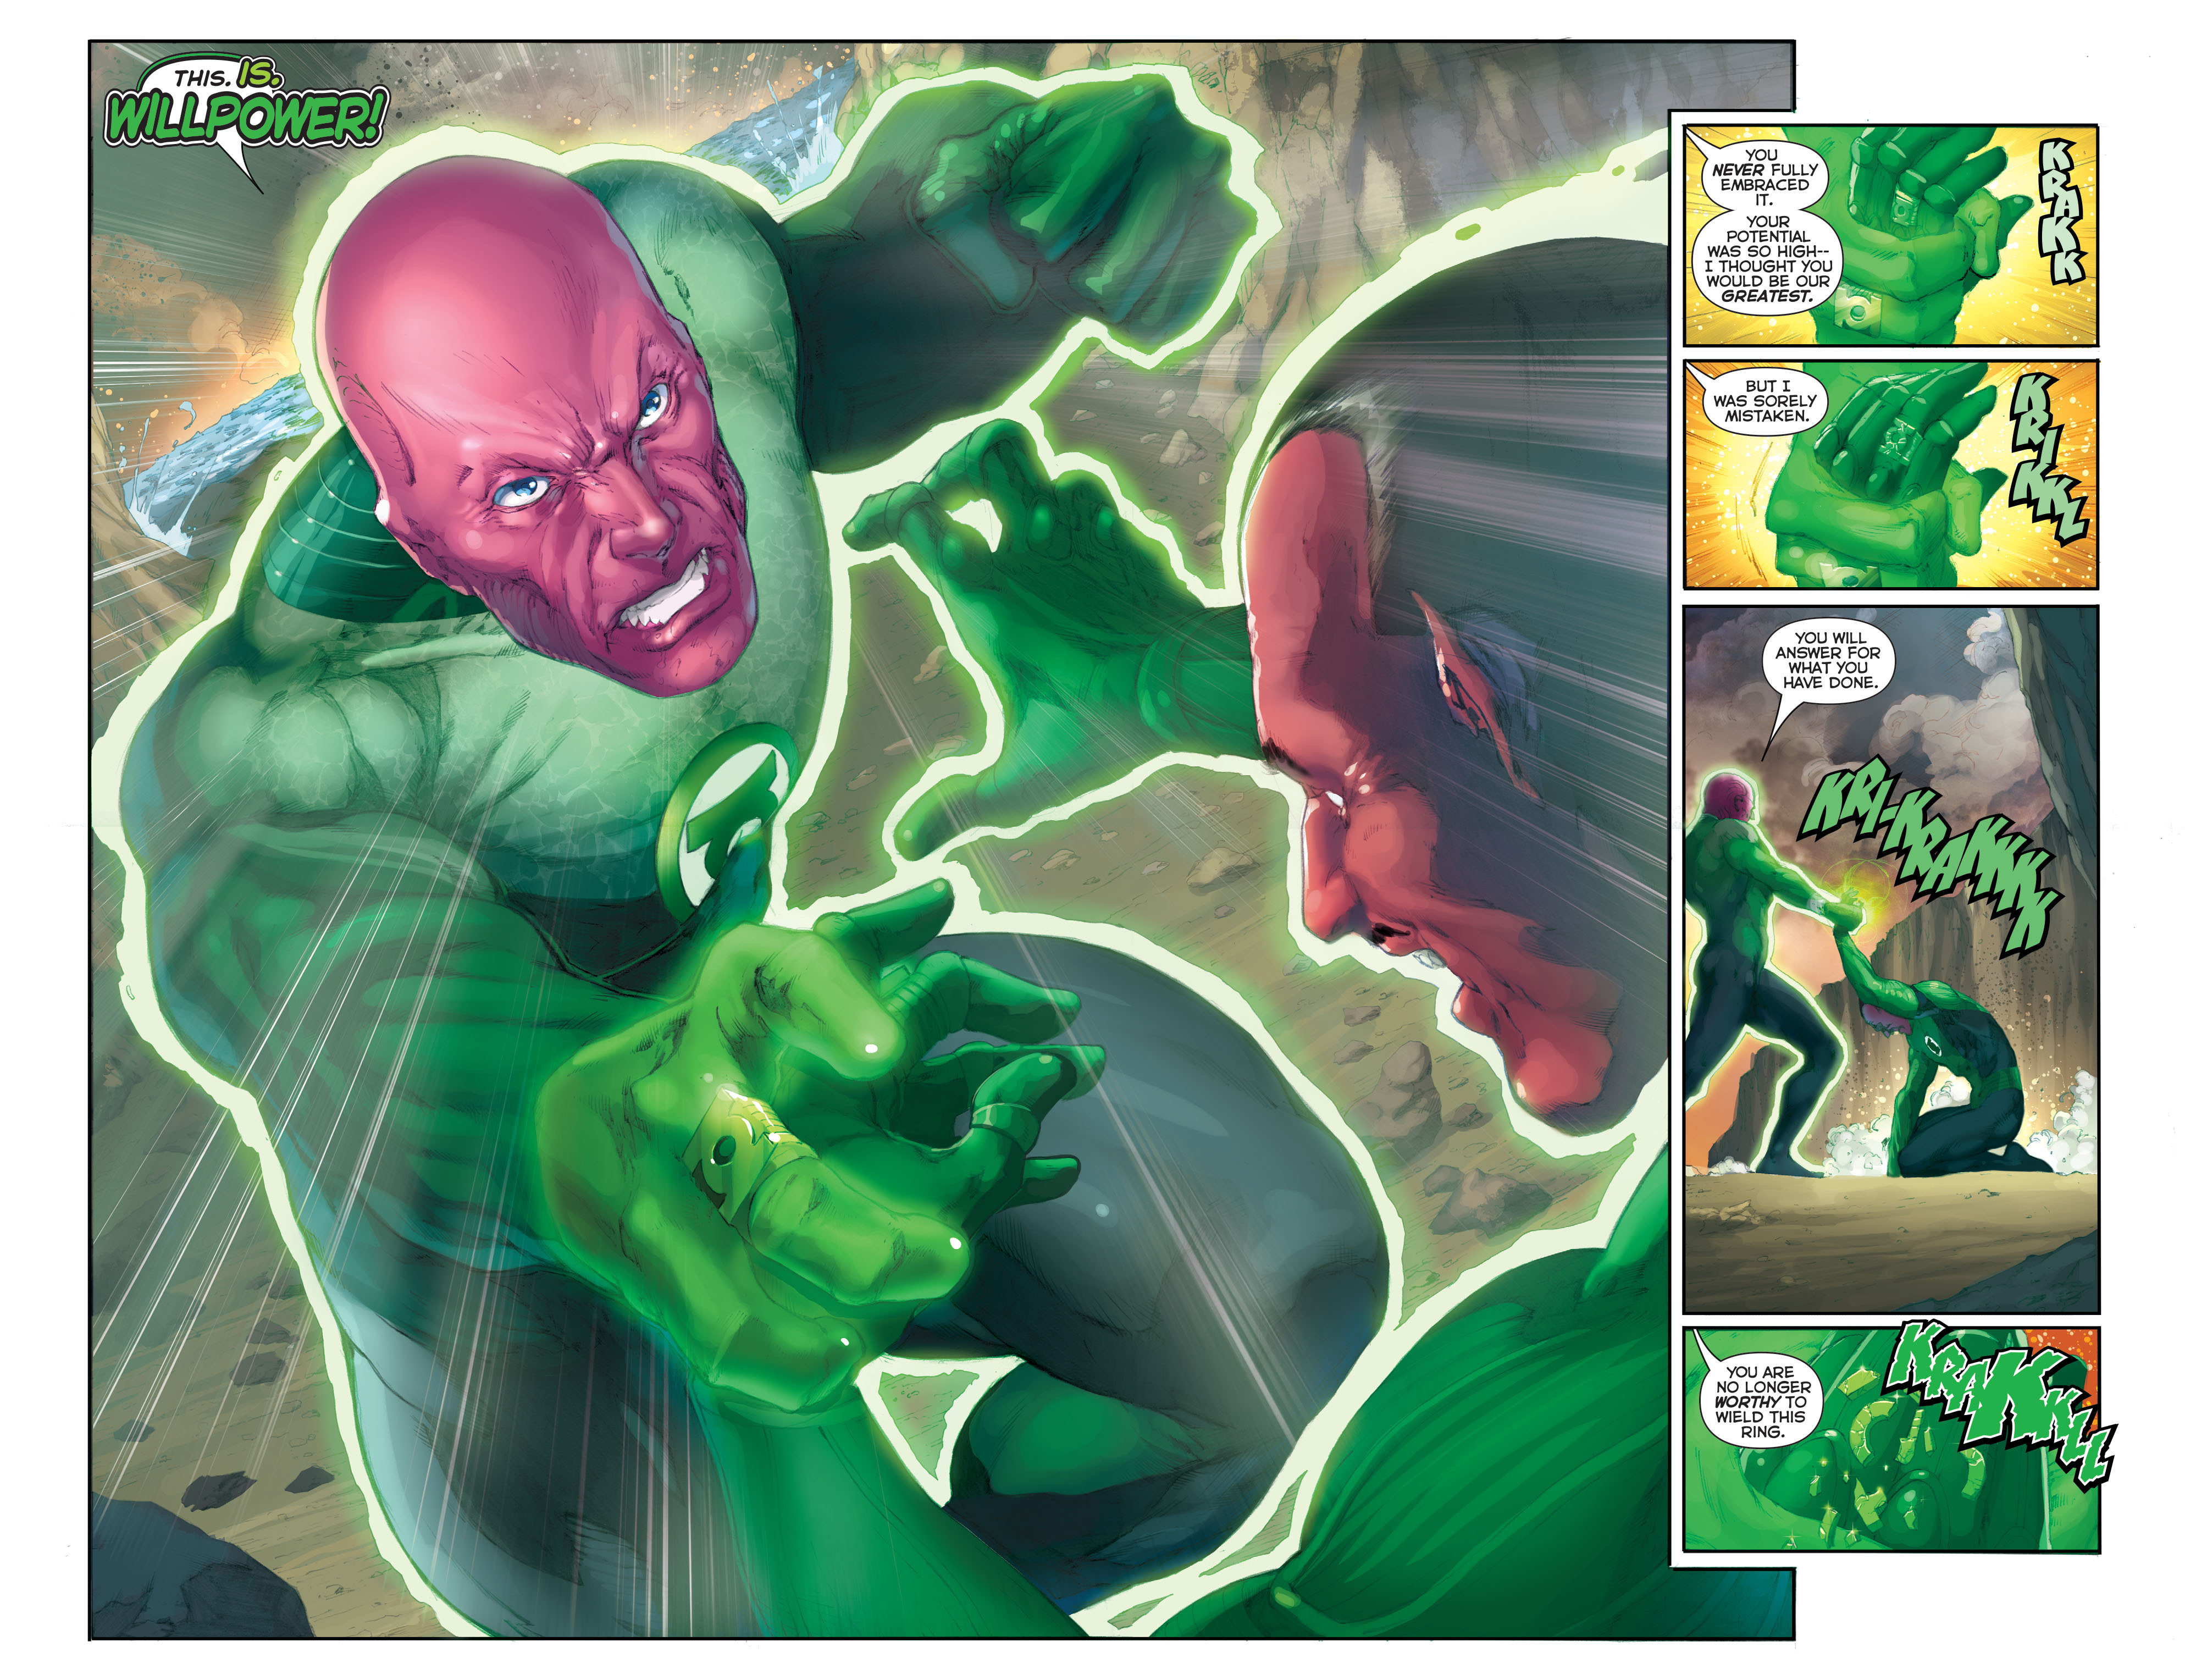 Flashpoint: The World of Flashpoint Featuring Green Lantern Full #1 - English 49